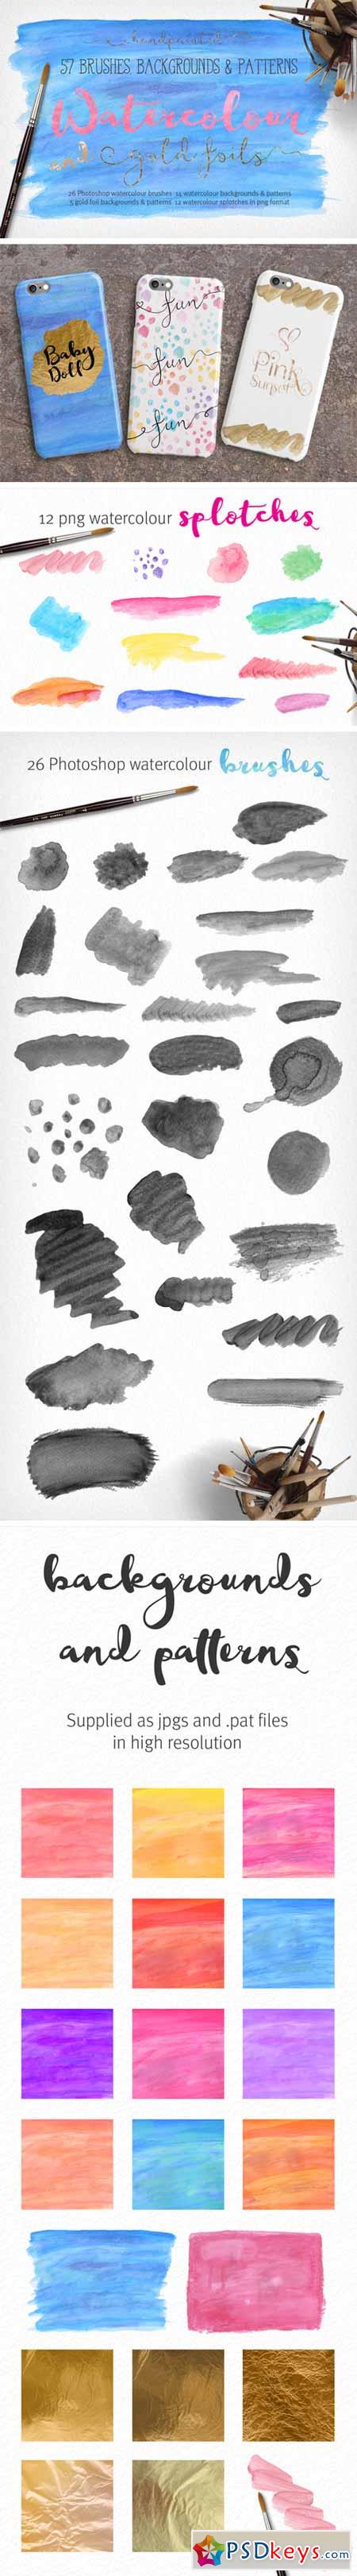 Watercolour Brushes & Backgrounds 419925